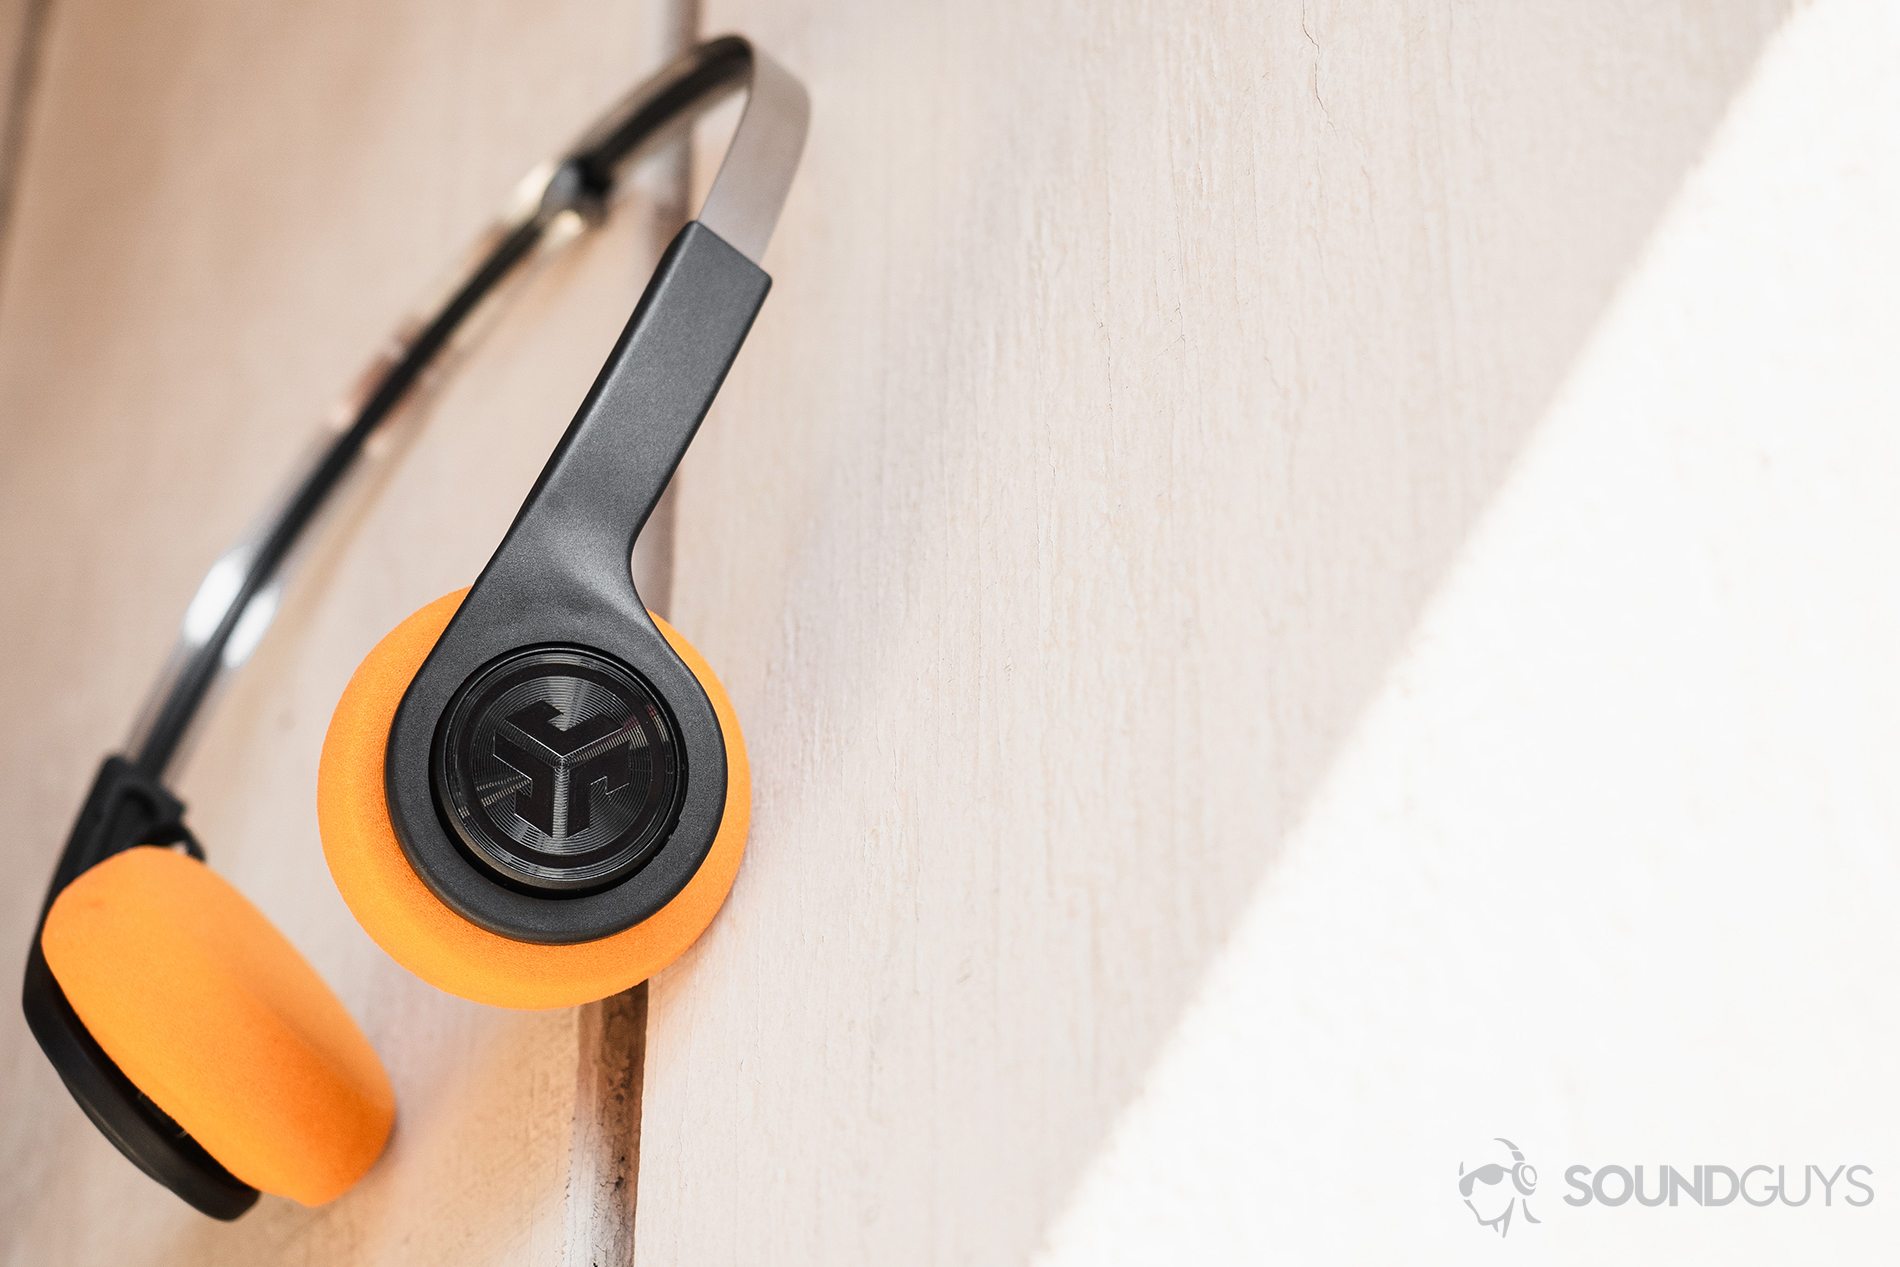 JLab Rewind Wireless Retro: The headphones resting atop a nail on a wood-paneled wall.